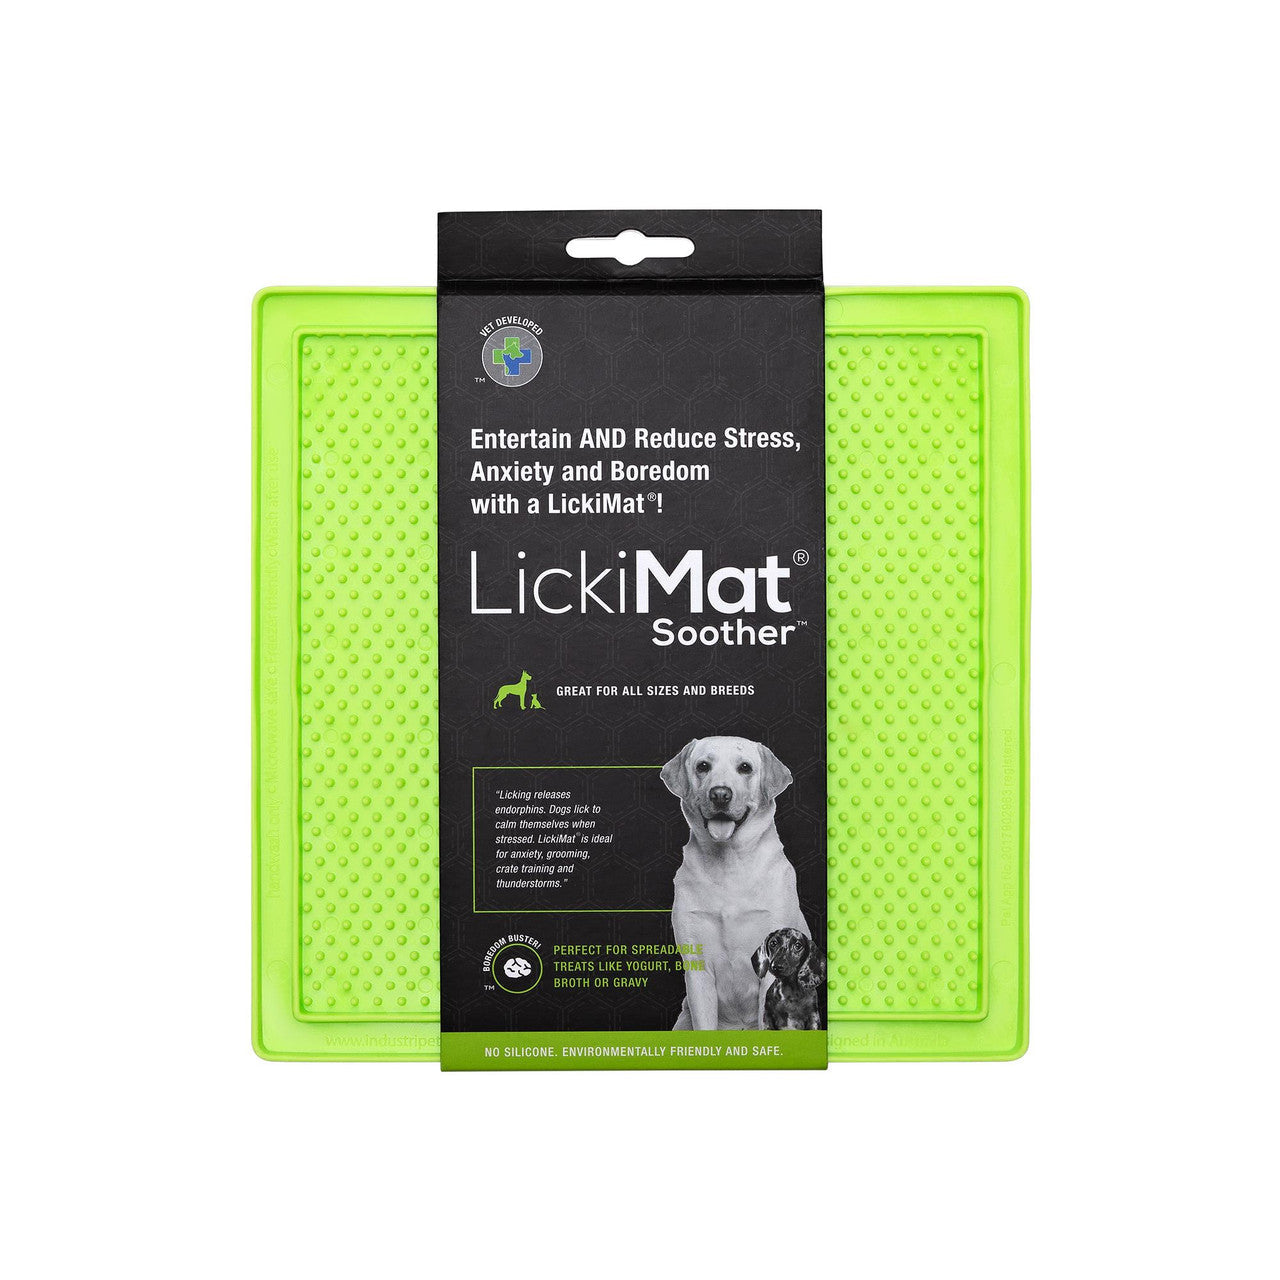 LickiMat Soother Green 9349785000128